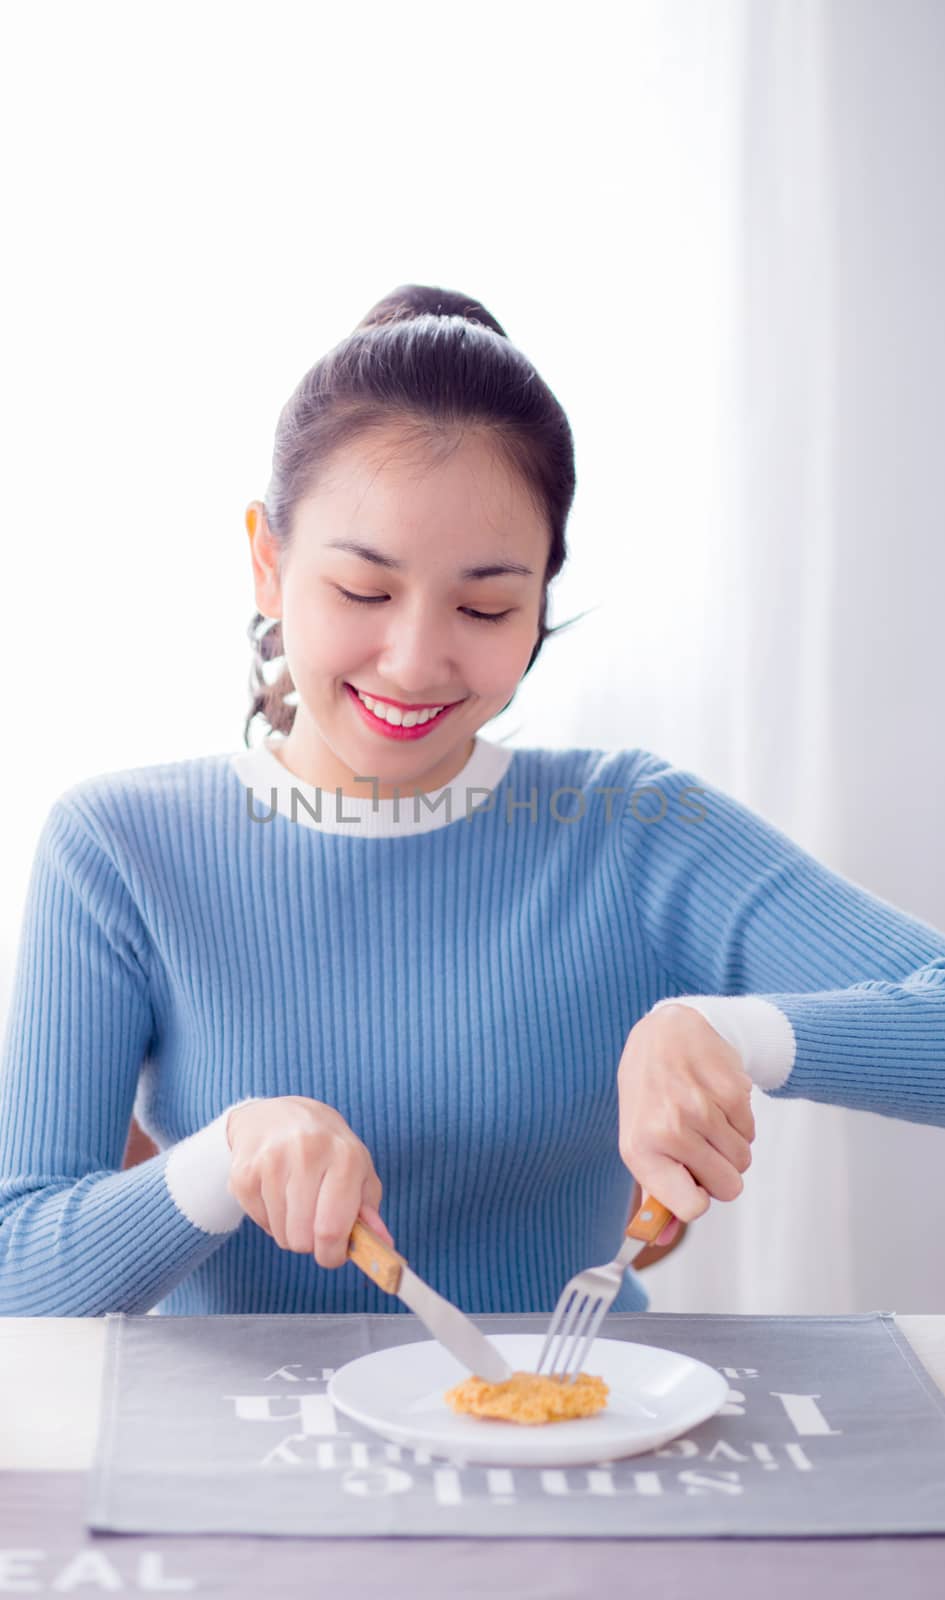 Pretty female hold spoon and knife eat food in kitchen.